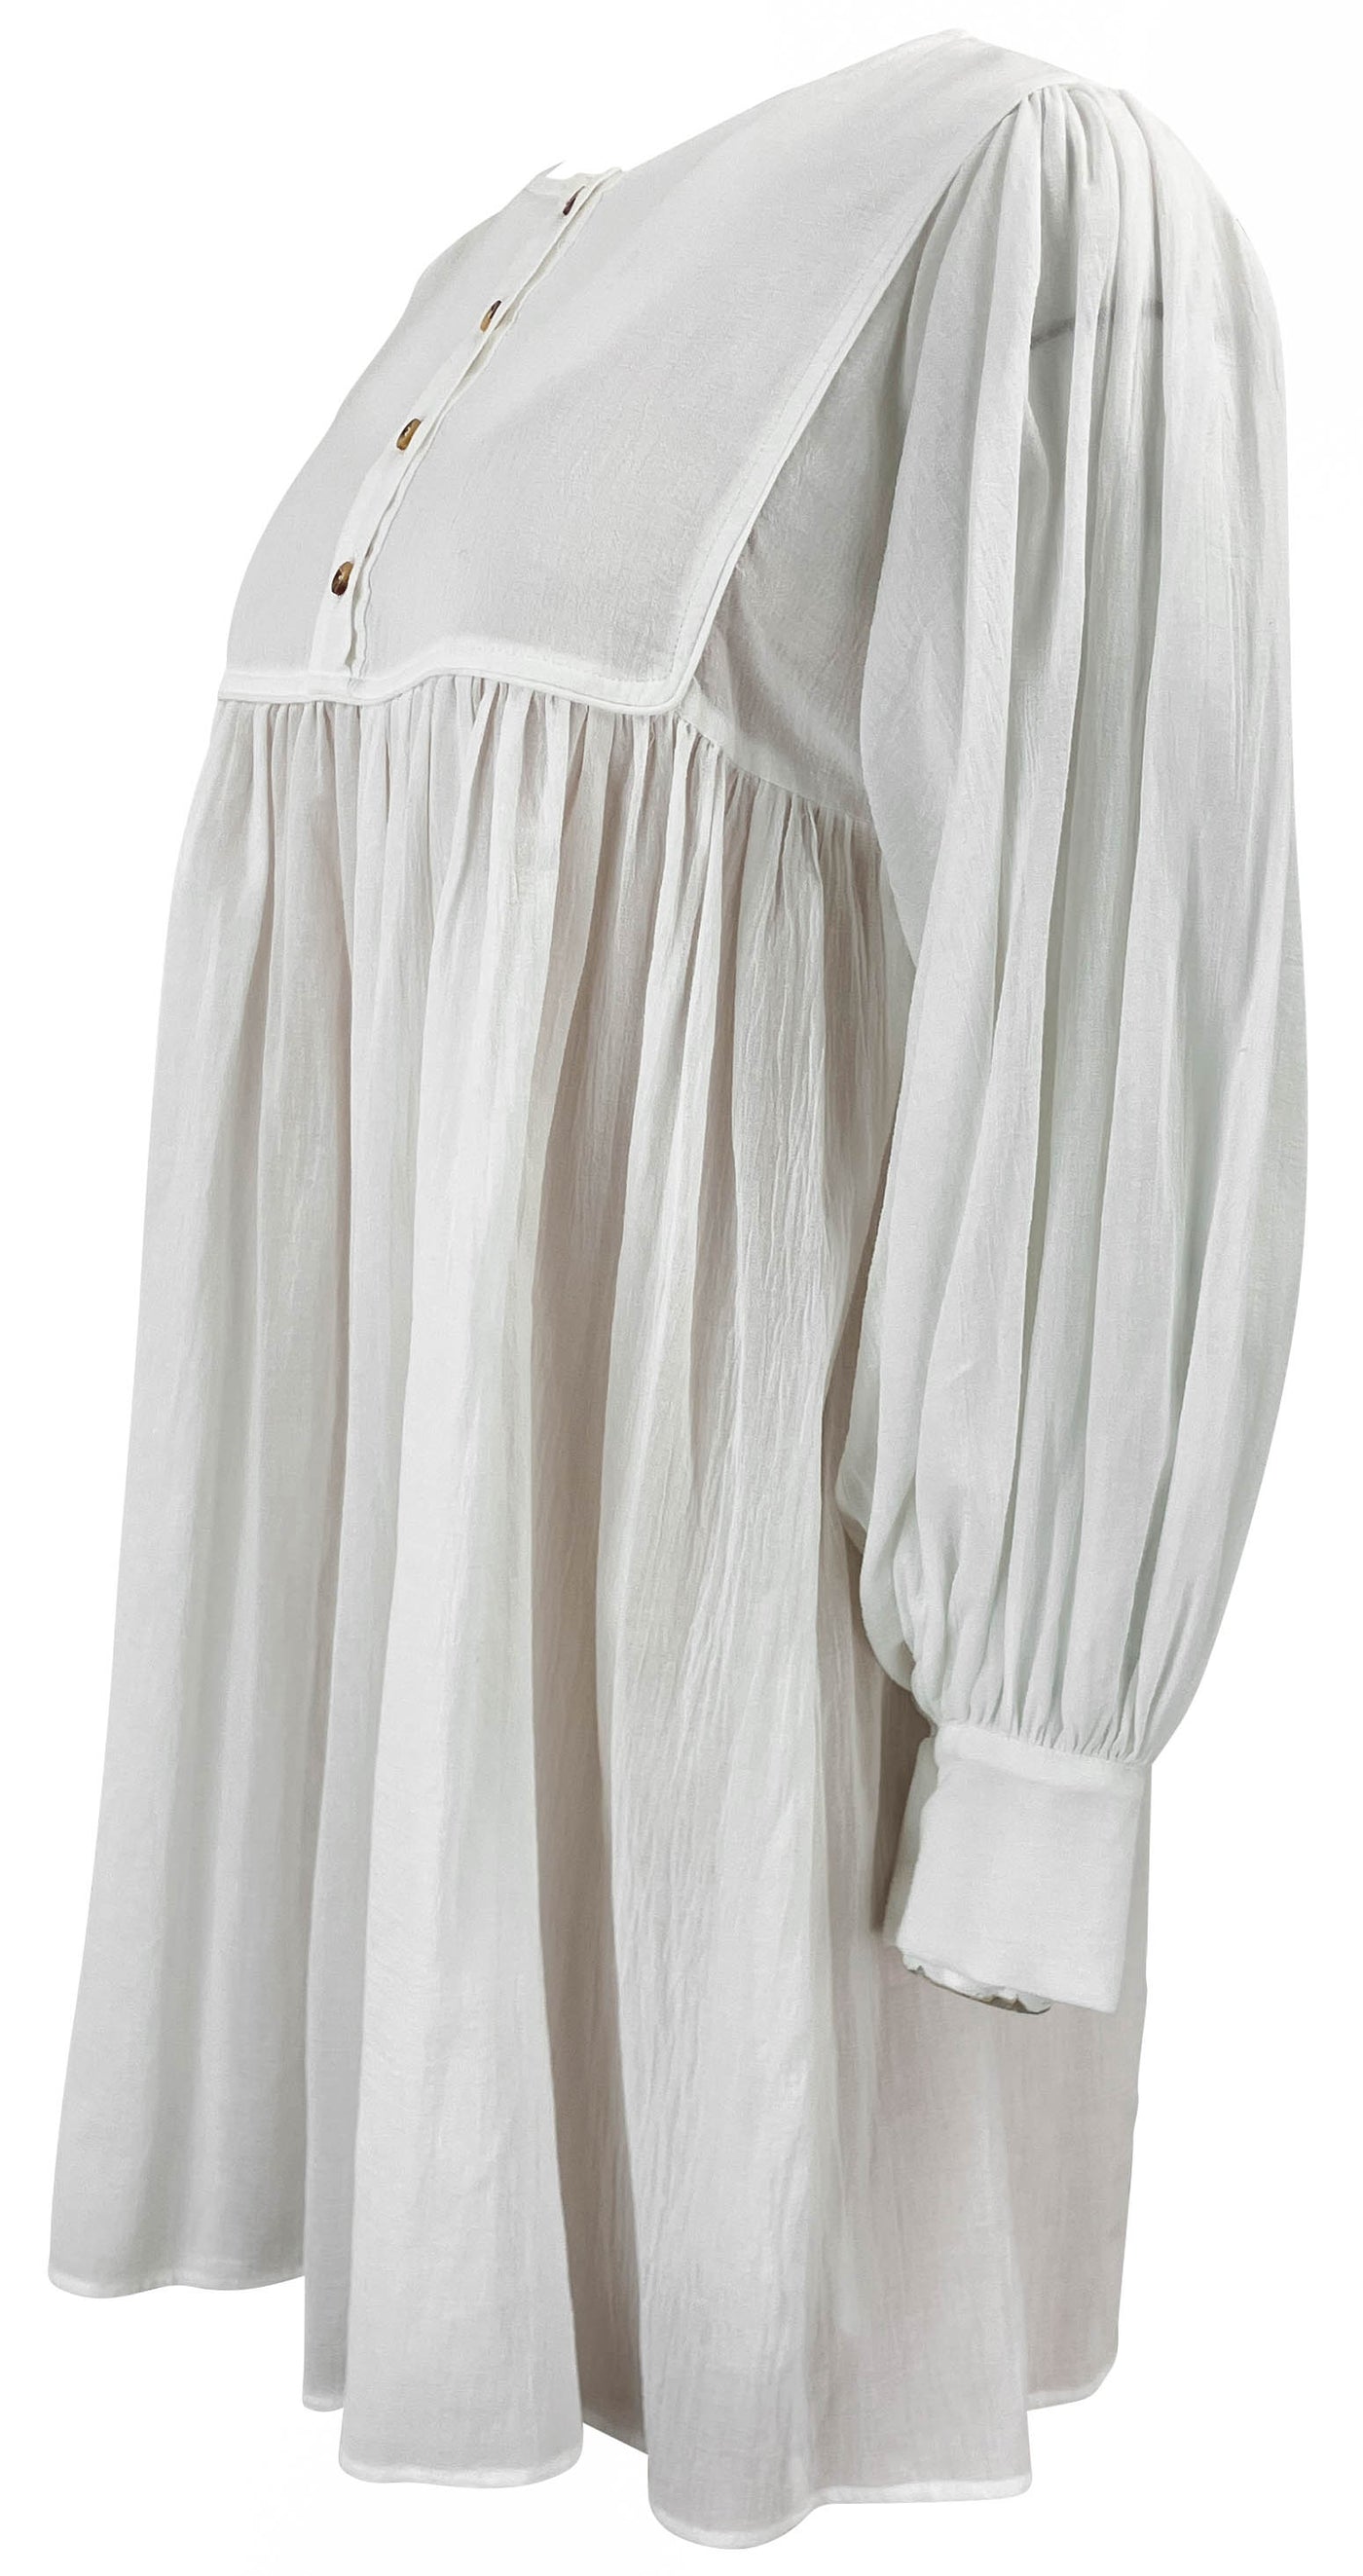 Ciao Lucia! Ciana Dress in White - Discounts on Ciao Lucia! at UAL